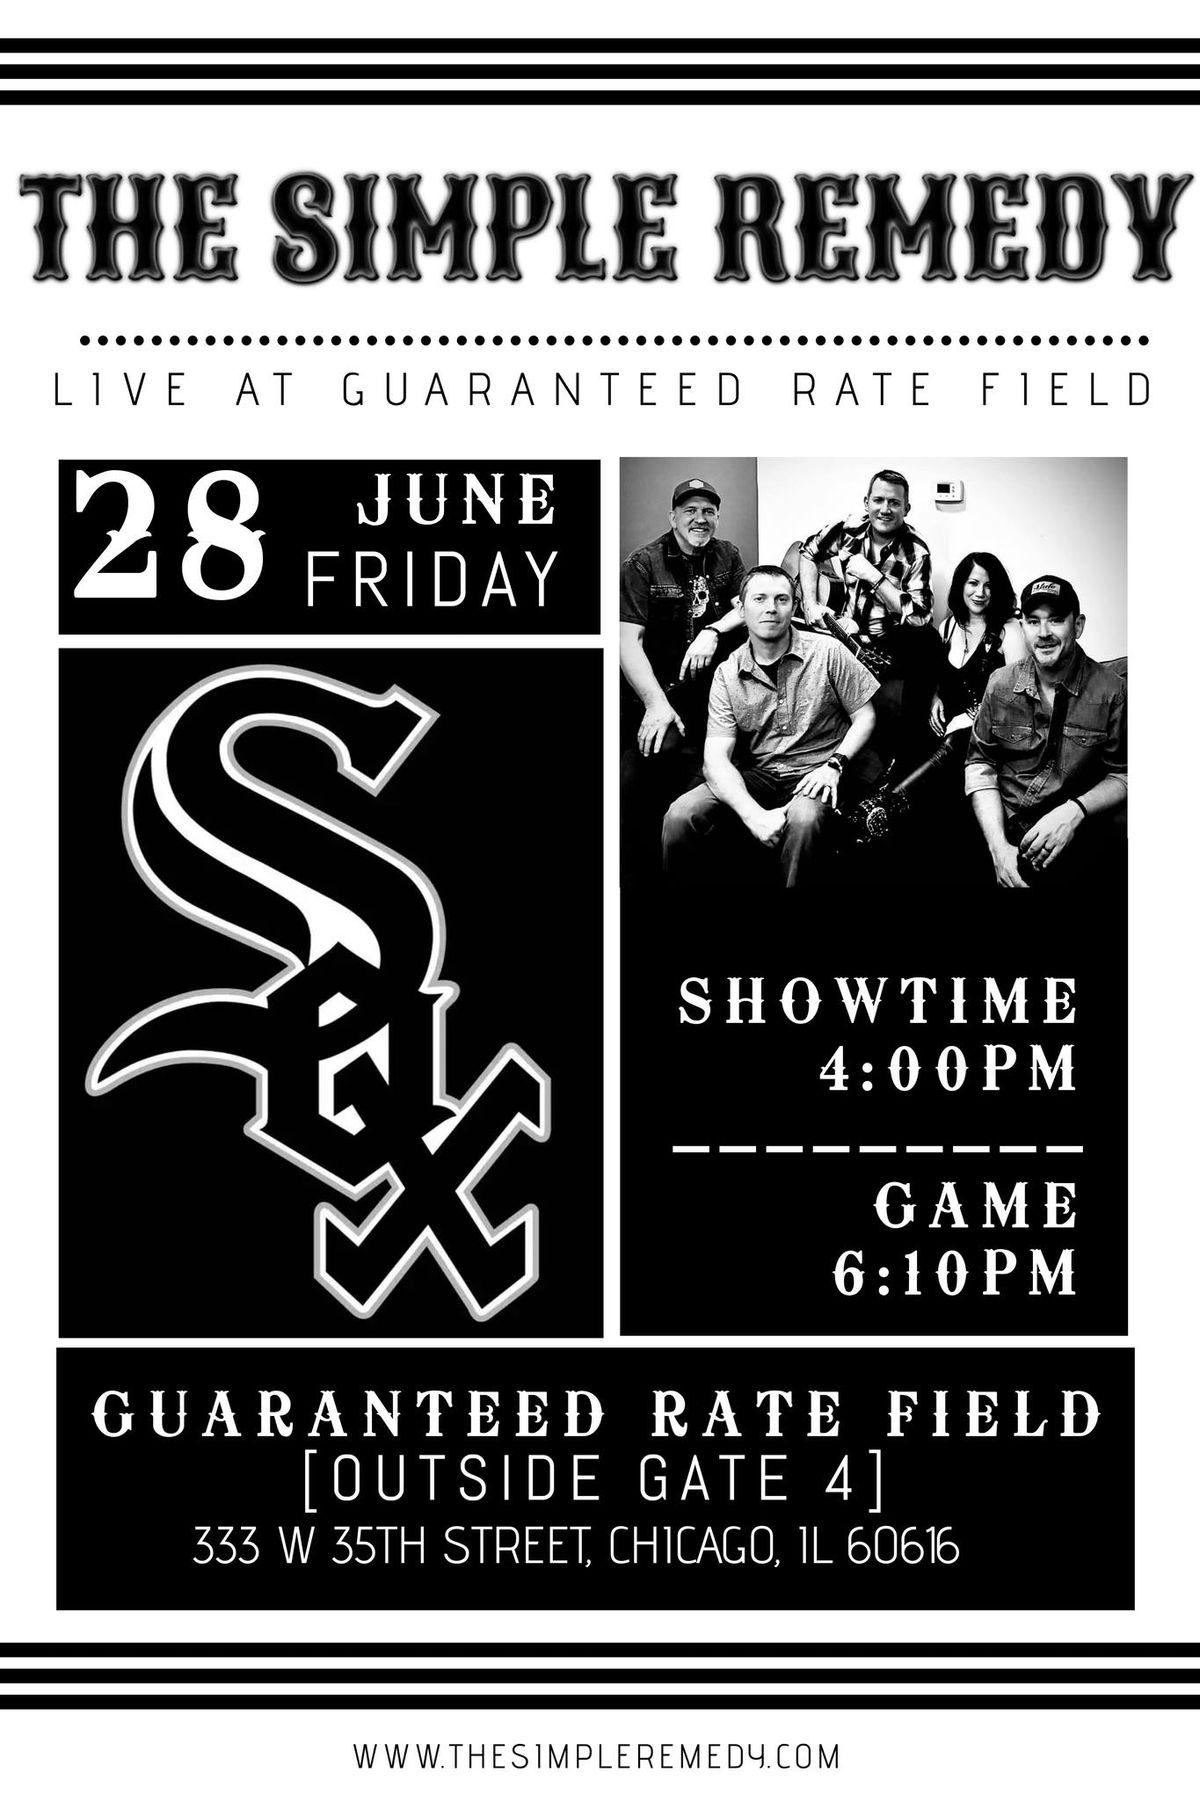 The Simple Remedy at White Sox (Guaranteed Rate Field)